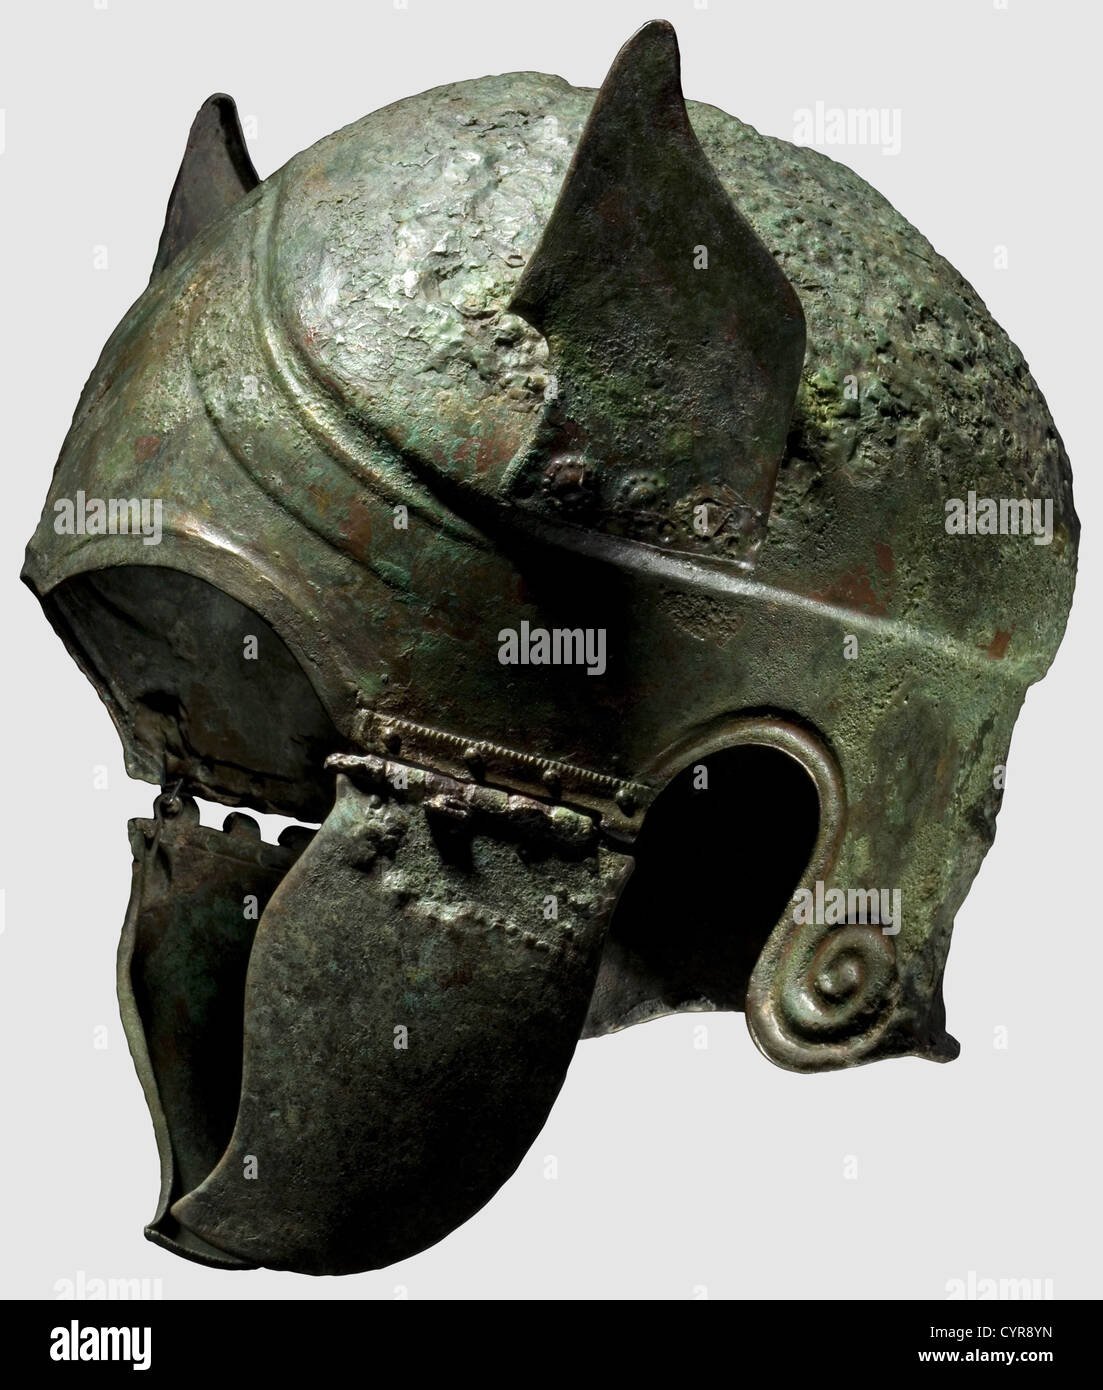 A Chalcidian type winged helmet,5th/4th century B.C.Bronze.Clearly offset dome,slightly carinated with double contoured forehead section with eyebrows,a short,pointed nose-guard,and embossed,stylised wings riveted to the sides with boss-shaped decorative rosettes.The edges of the wings flanged inward.Cusped cheekpieces,the plates for the tubular hinges with serrated edges.Moulded helmet perimeter with volutes embossed behind the ear cutouts.Slightly projecting neck guard rim.Height 27.7 cm.Height of the wings 11 cm.Width 6.5 cm.Weight 796 g.Gr,Additional-Rights-Clearences-Not Available Stock Photo